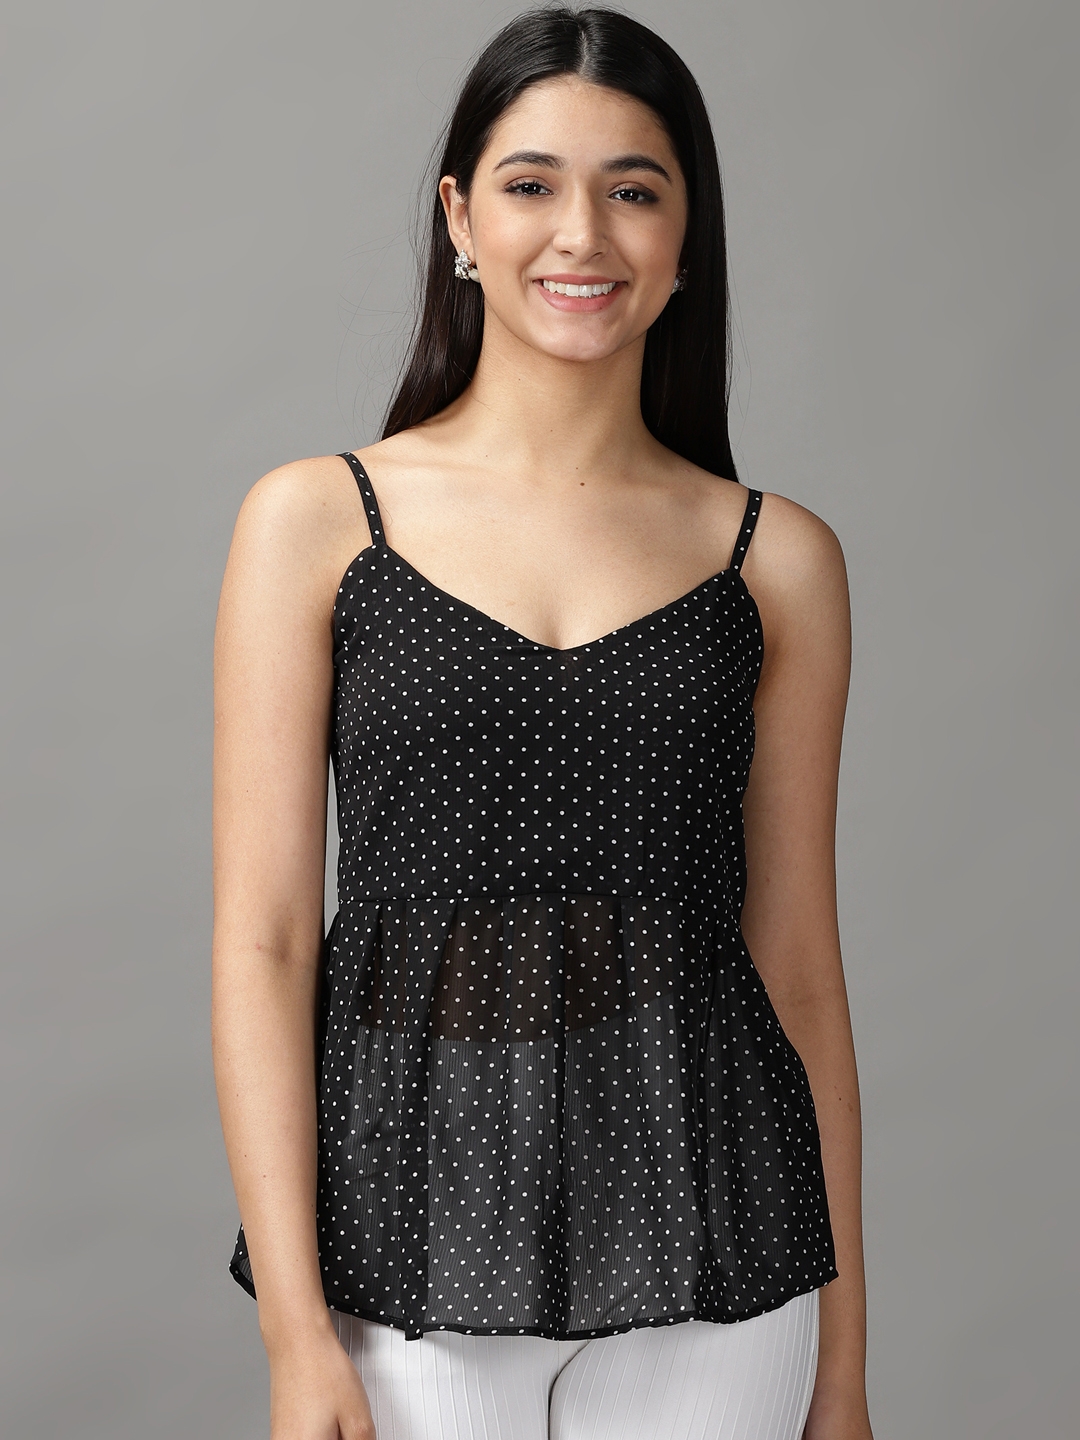 Women's Black Polyester Printed Tops